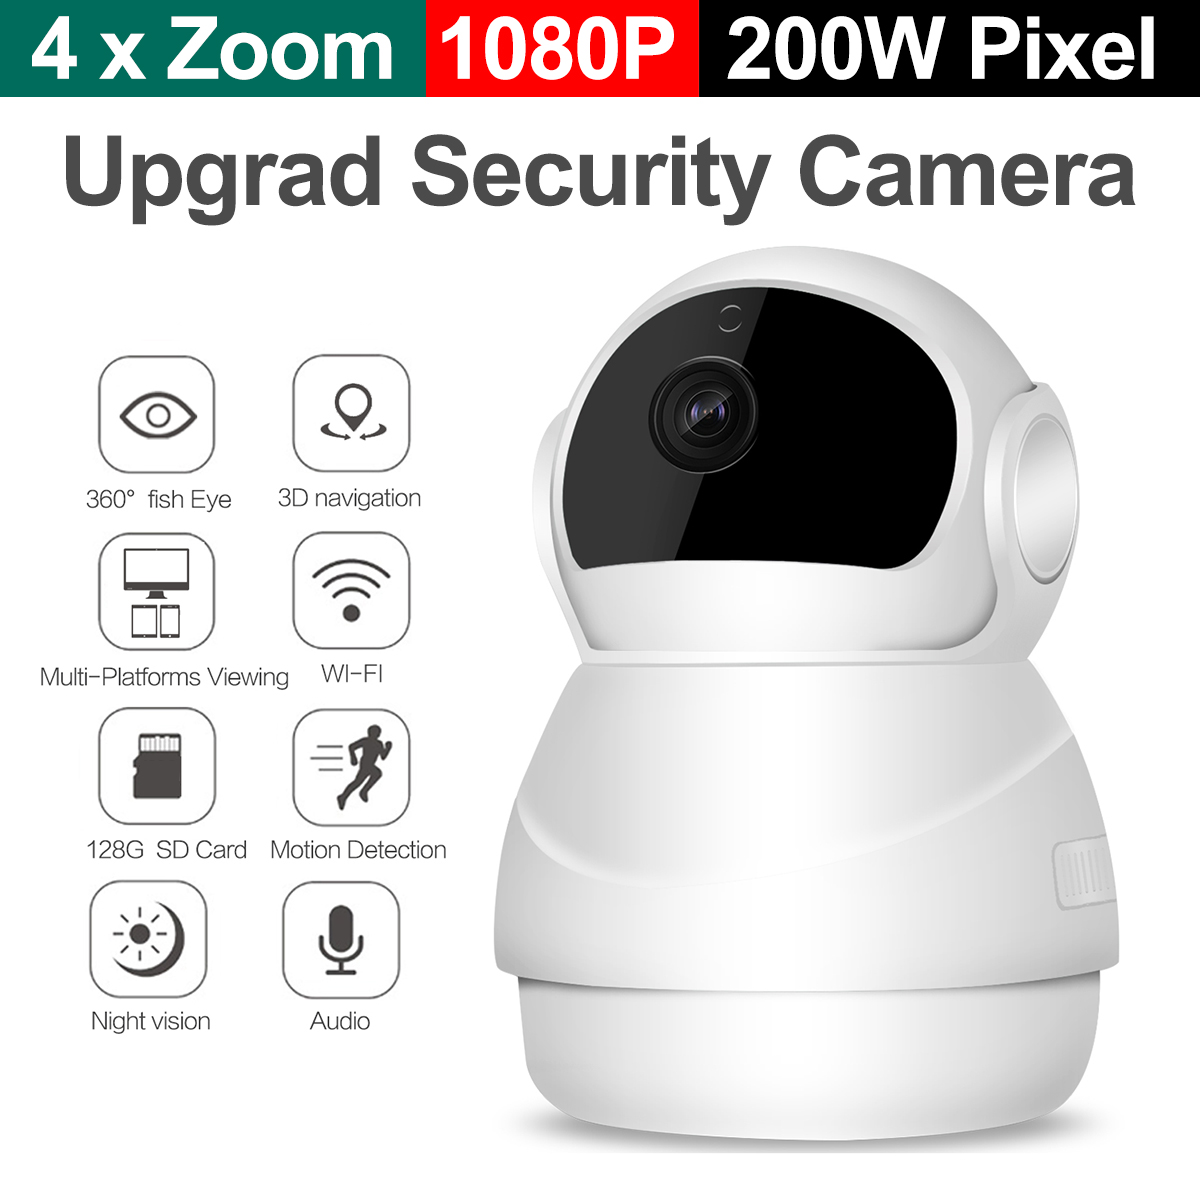 Bakeey 1080P 360 Degree Smart WIFI IP Camera Support Two-way Audio PIR Motion Sensor 4 x Zoom TF Card Storage Baby Monitor 4